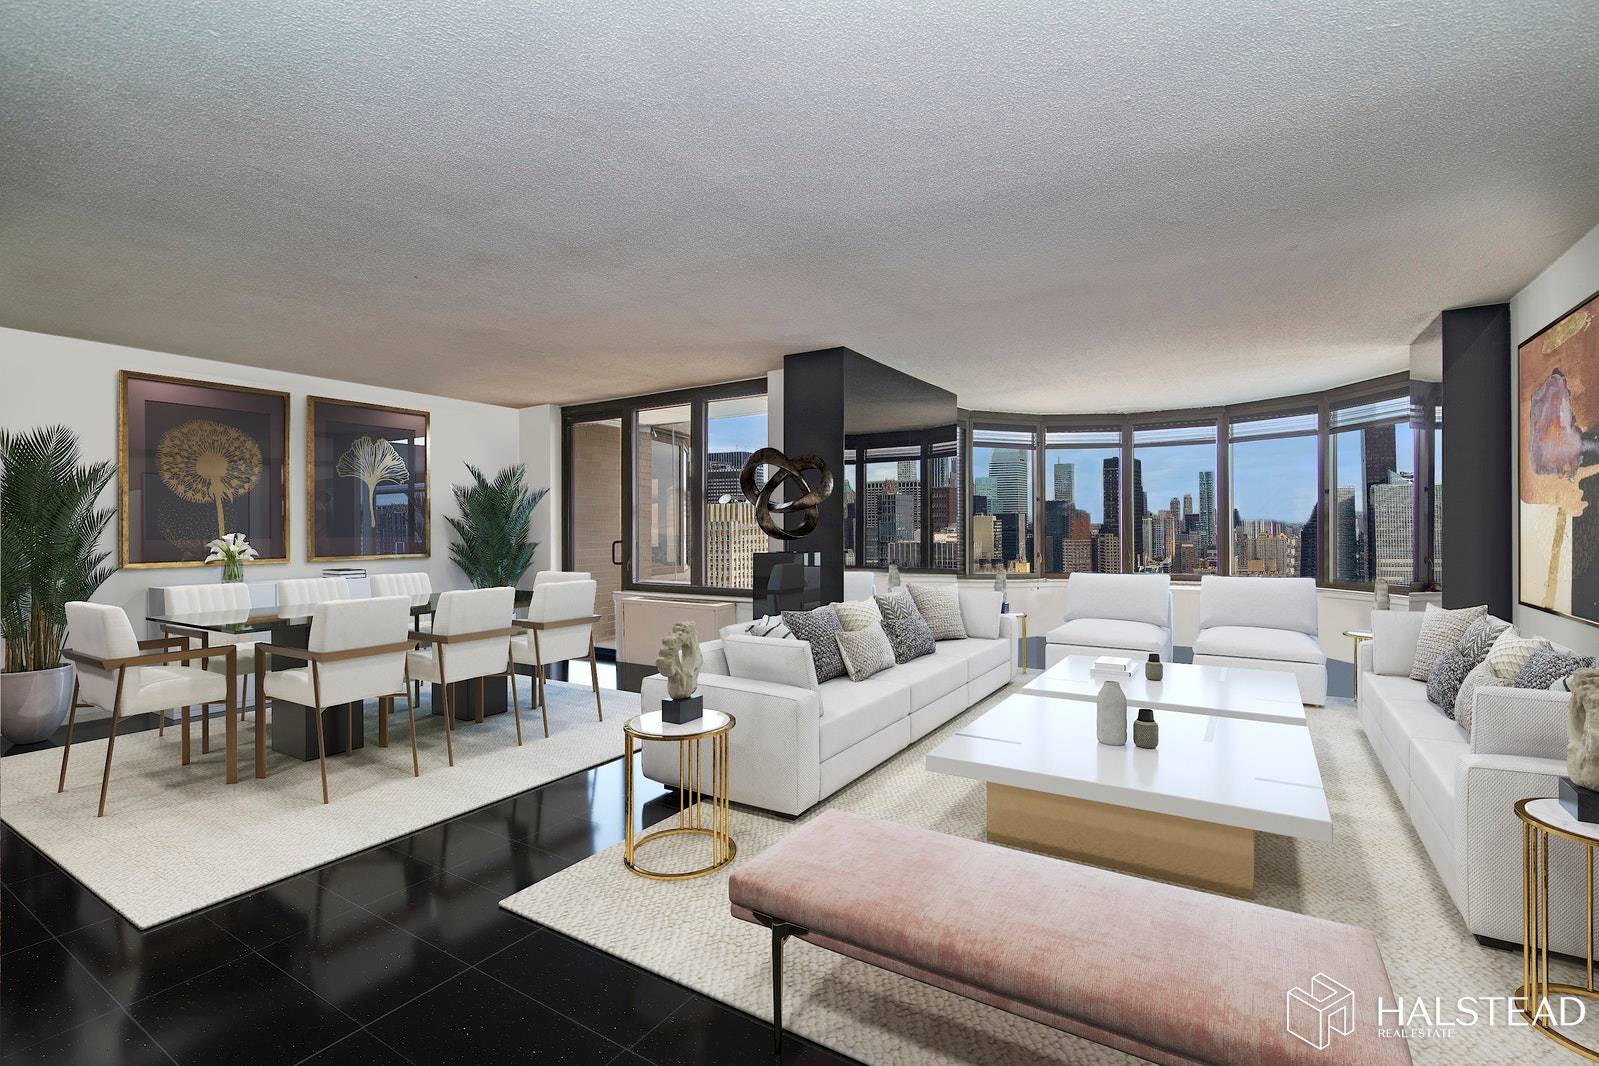 Opportunity knocks in this 1546 foot condo with fabulous panoramic river and city views that go on forever.